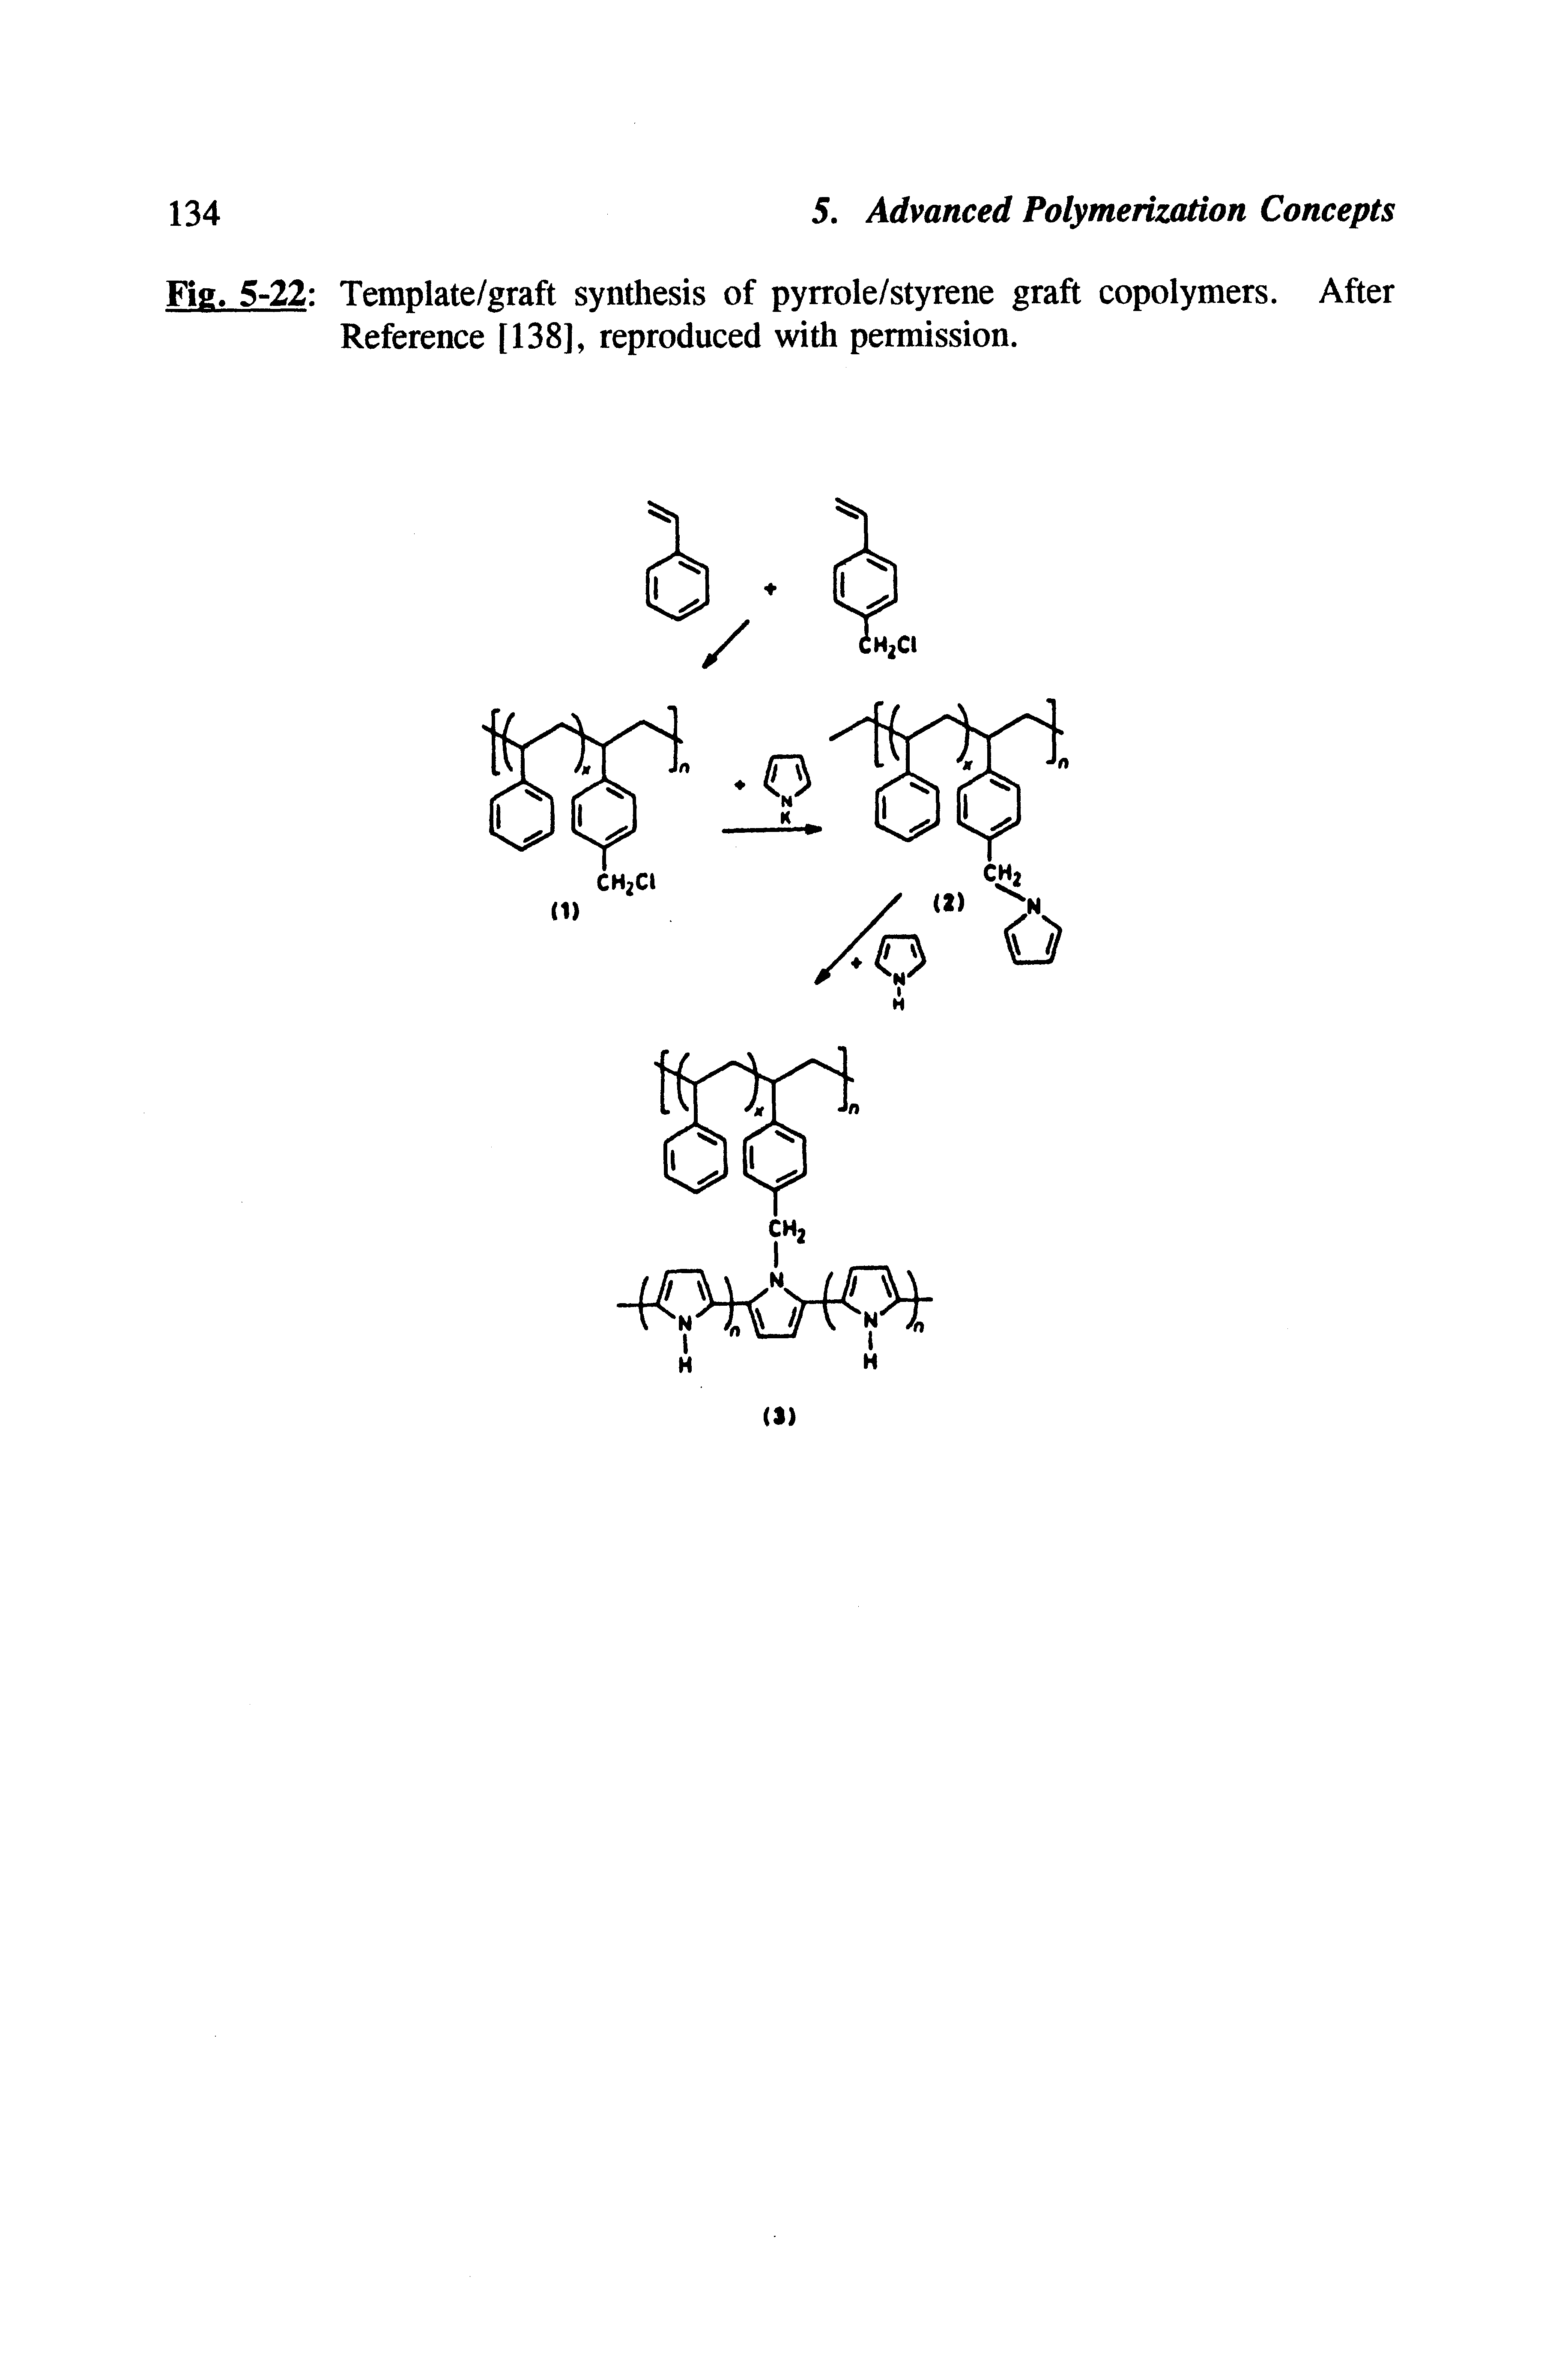 Fig. 5-22 Template/graft synthesis of pyrrole/styrene graft copolymers. After Reference [138], reproduced with permission.